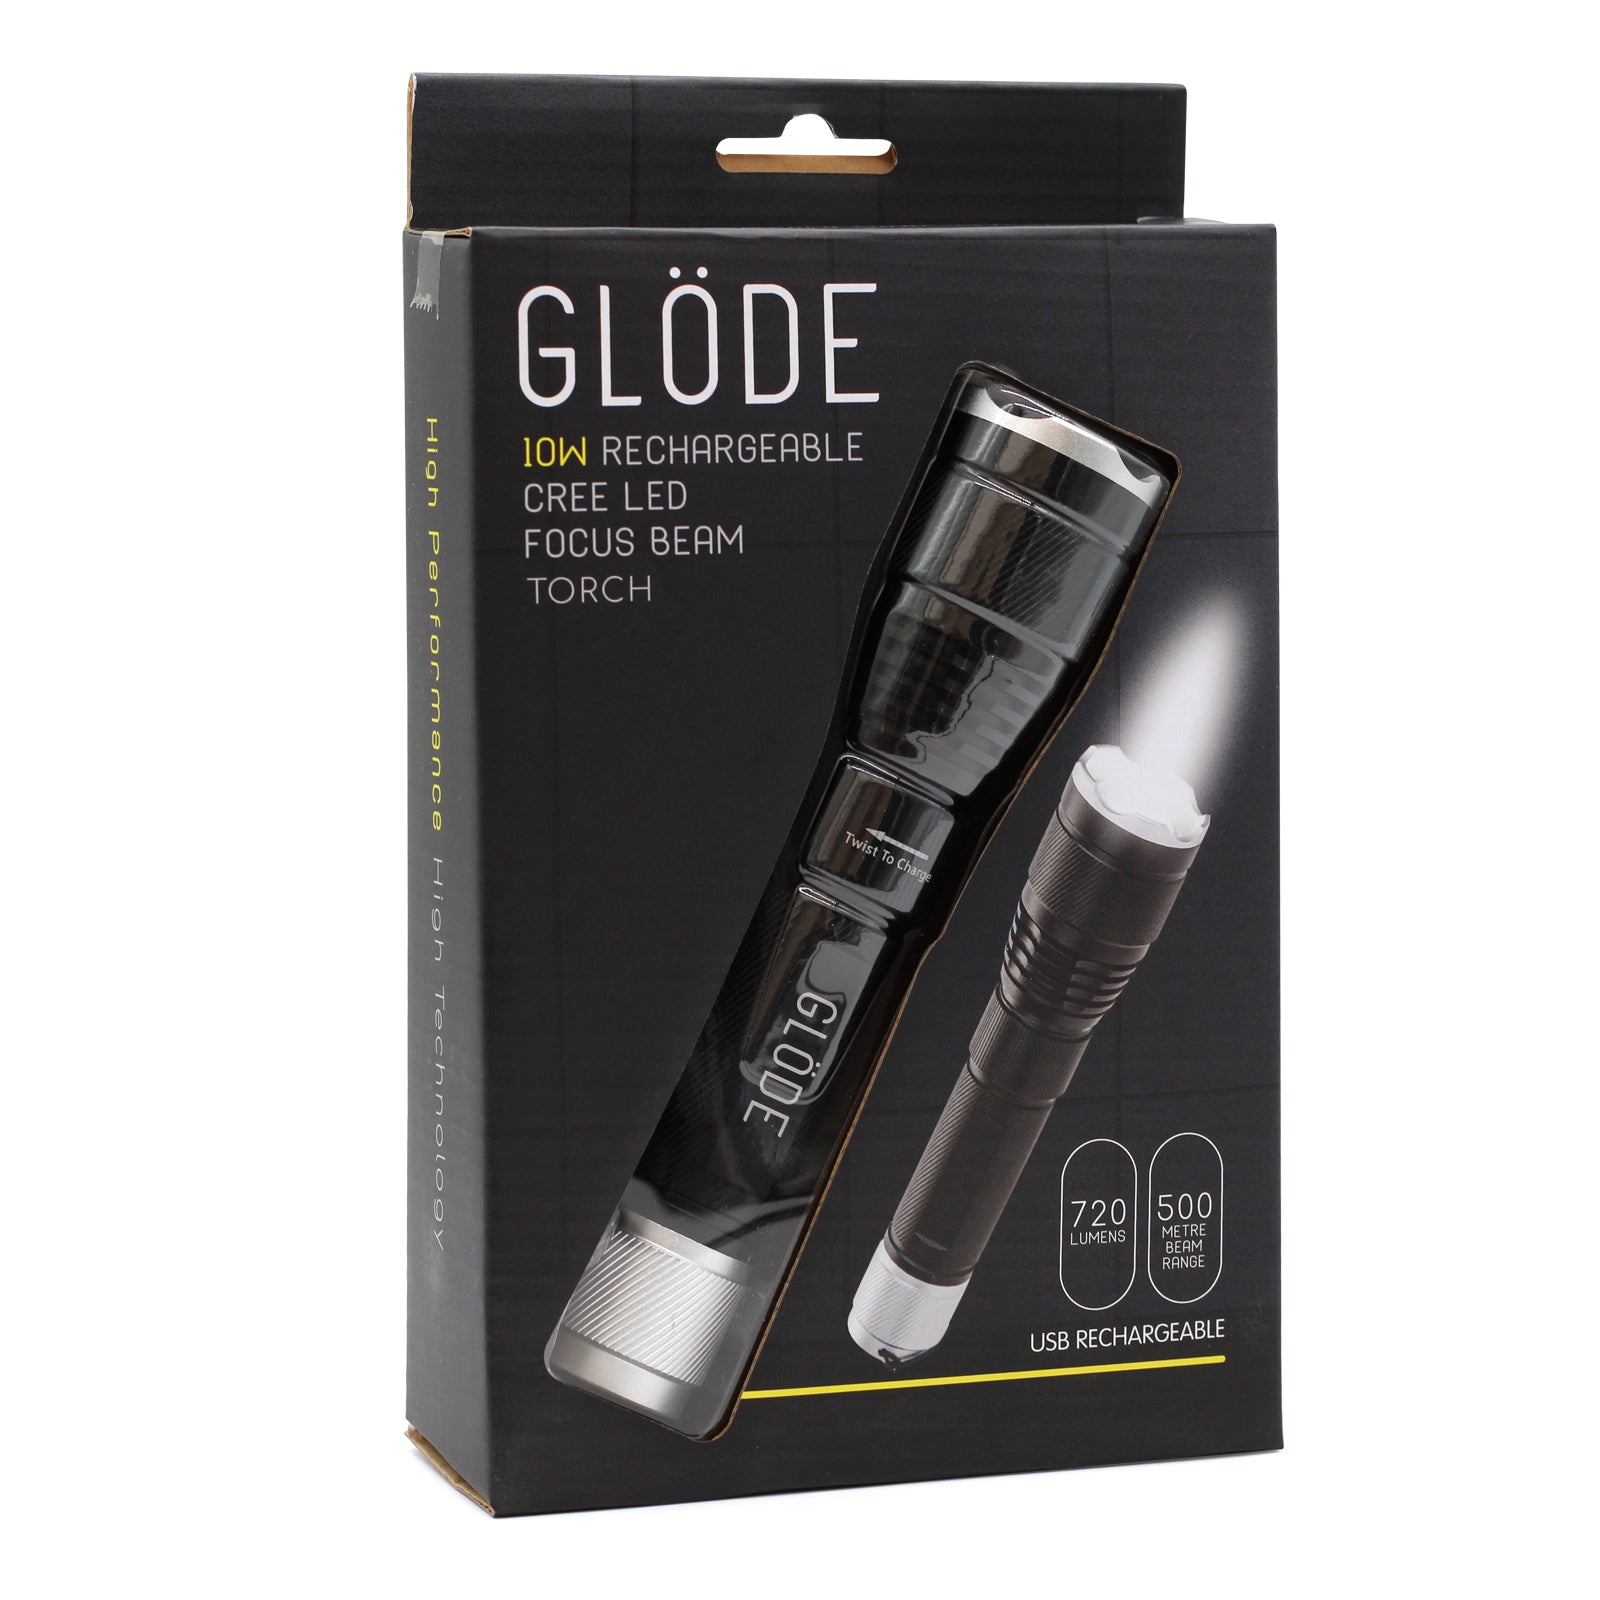 Glode Flashlight Rechargeable Cree LED Focus Beam Torch Box